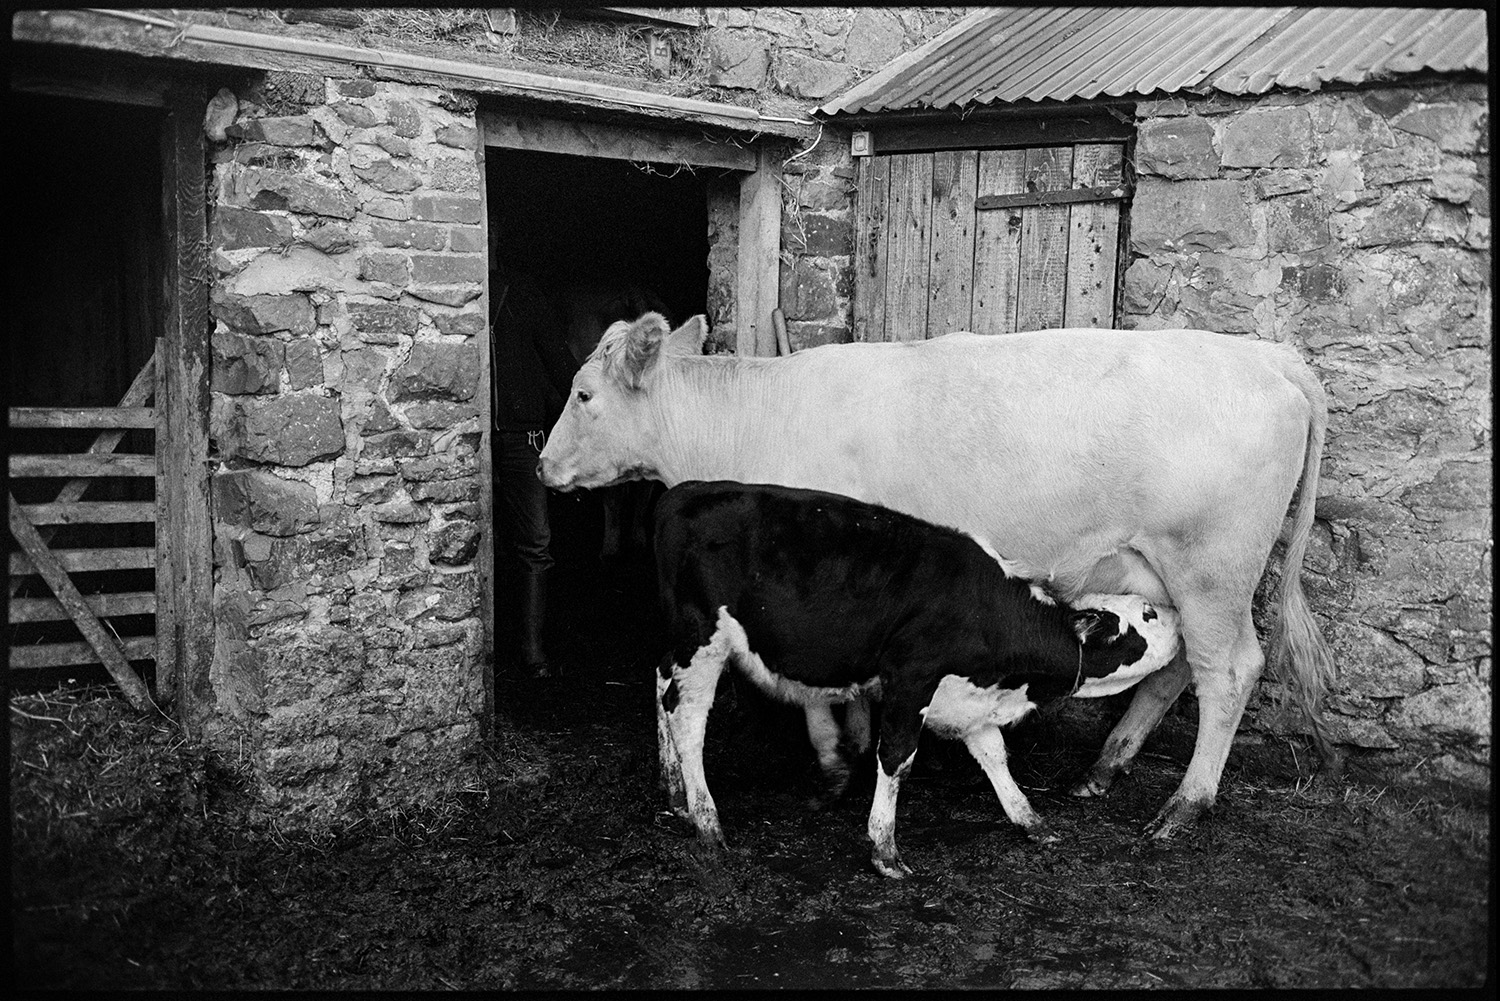 Cattle eating silage, cow suckling calf in yard. 
[A calf suckling from a cow by a stone barn in a muddy farmyard at Ingleigh Green.]